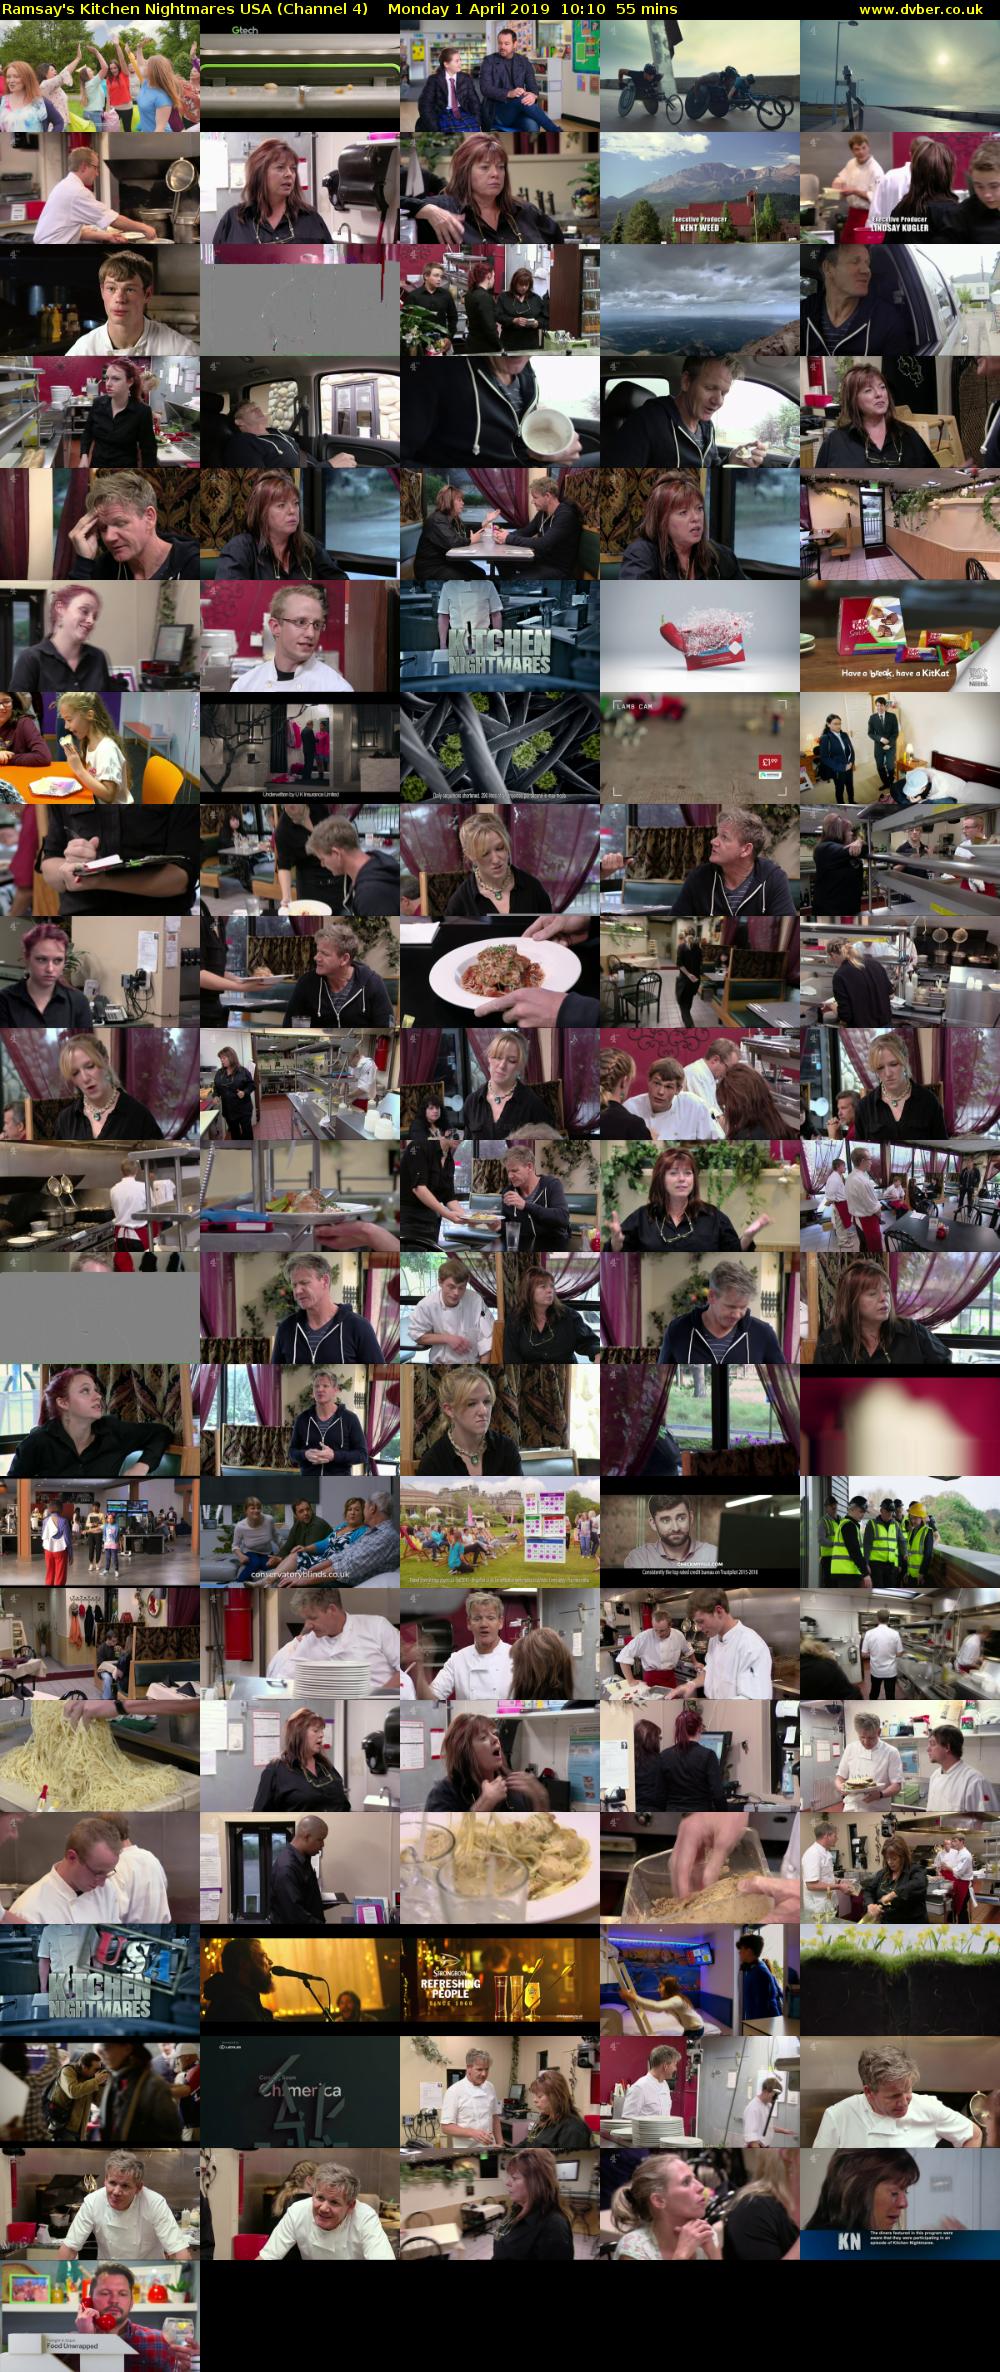 Ramsay's Kitchen Nightmares USA (Channel 4) Monday 1 April 2019 10:10 - 11:05